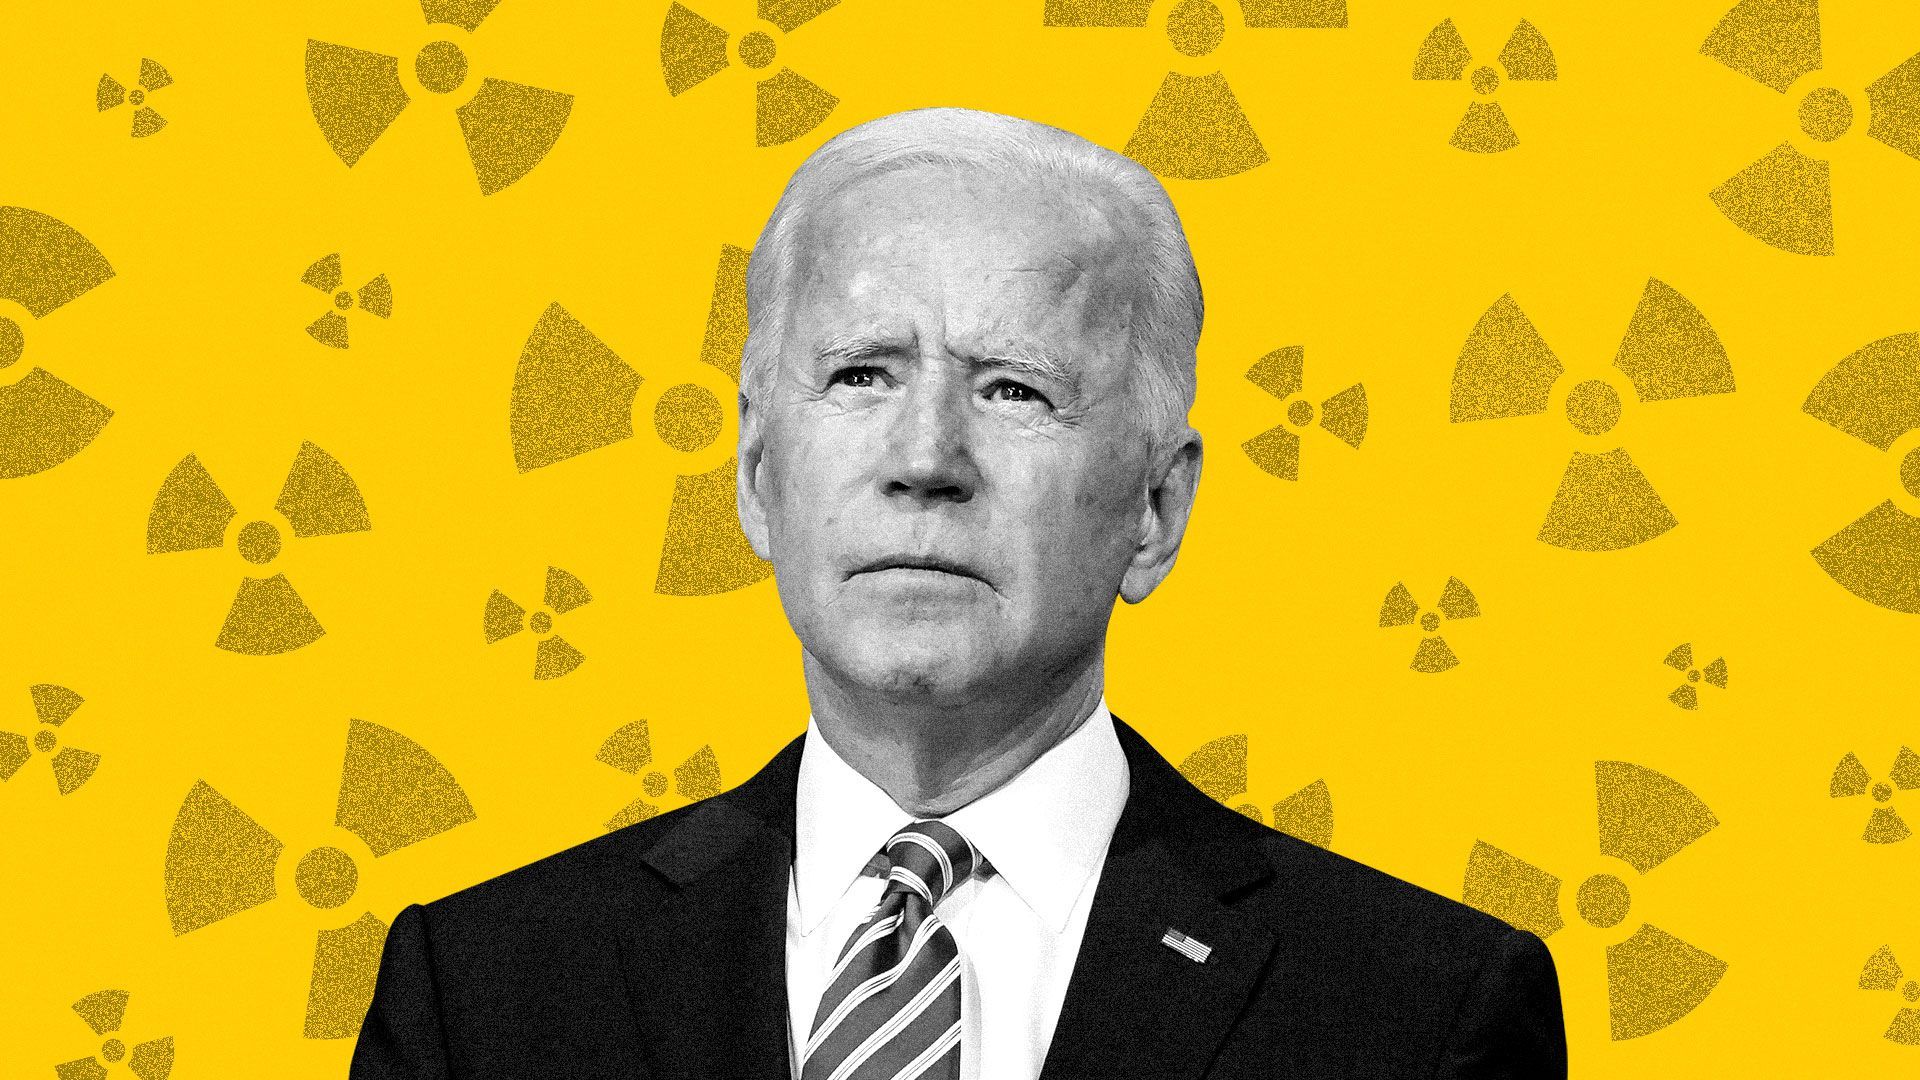 Illustration of serious looking Joe Biden on a nuclear icon pattern